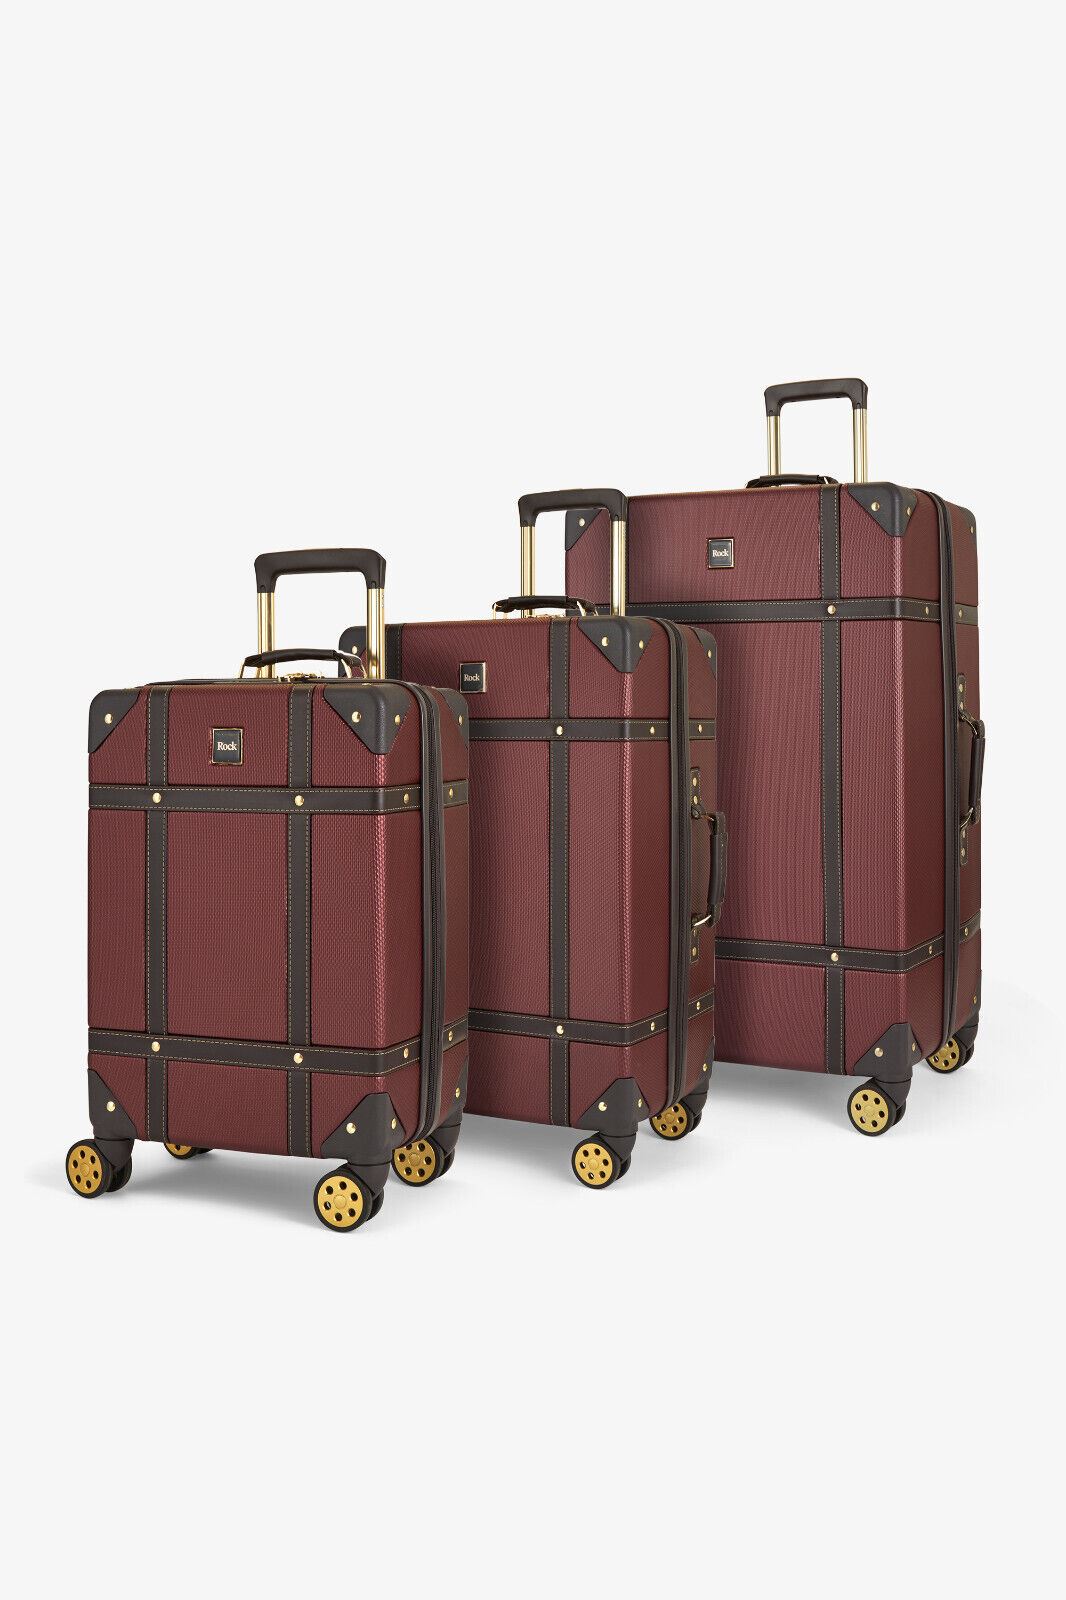 Hard Shell Burgundy Luggage Suitcase Set Trunk Cabin Travel Bags - Upperclass Fashions 